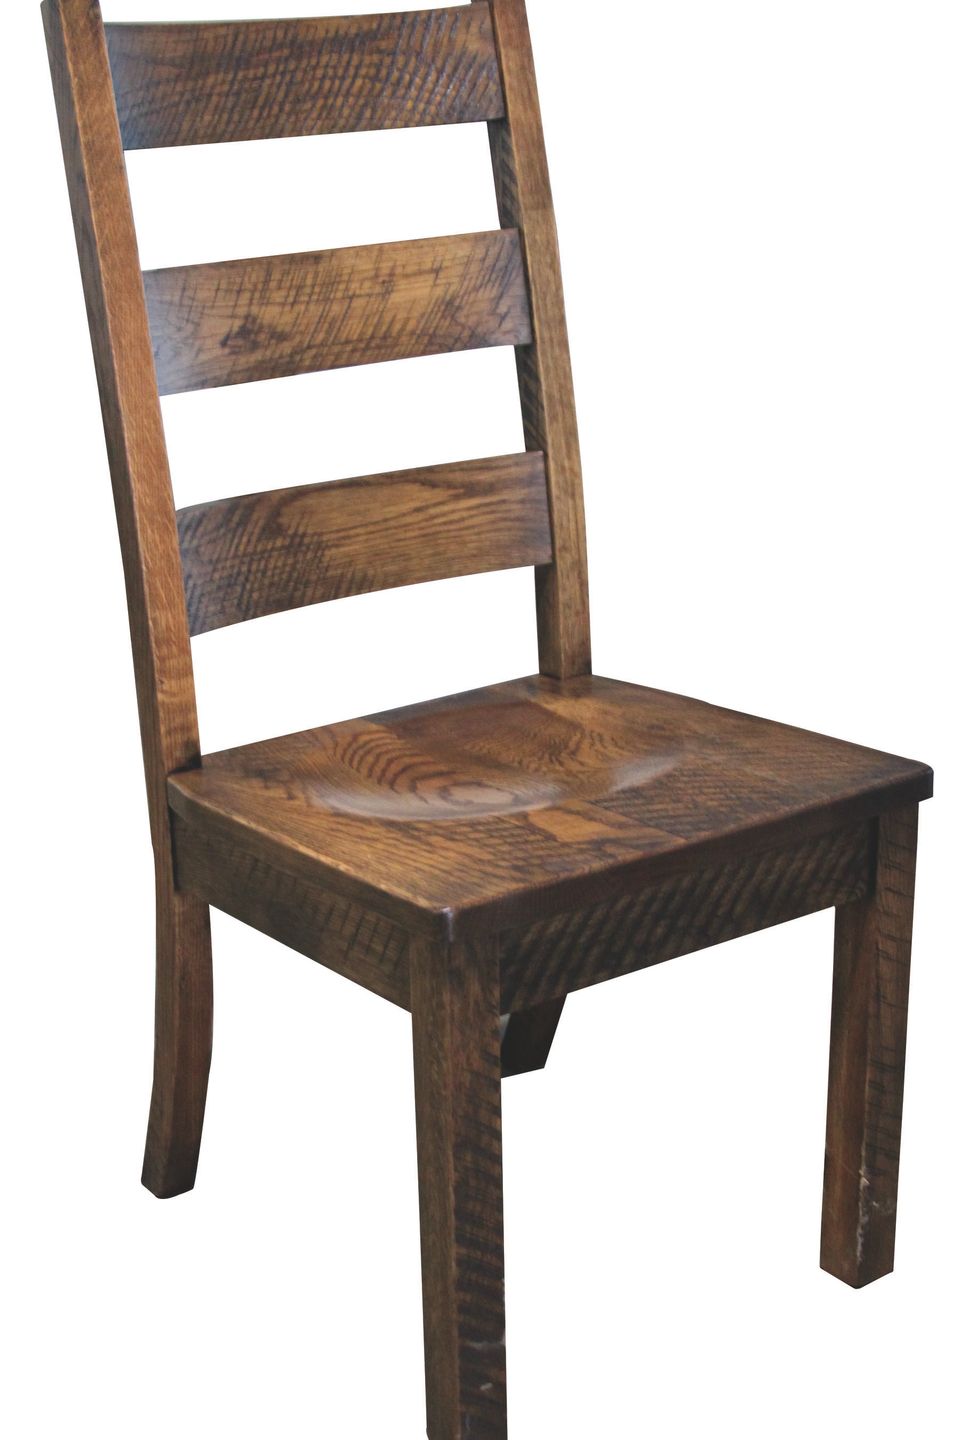 Hlw rustic side chair